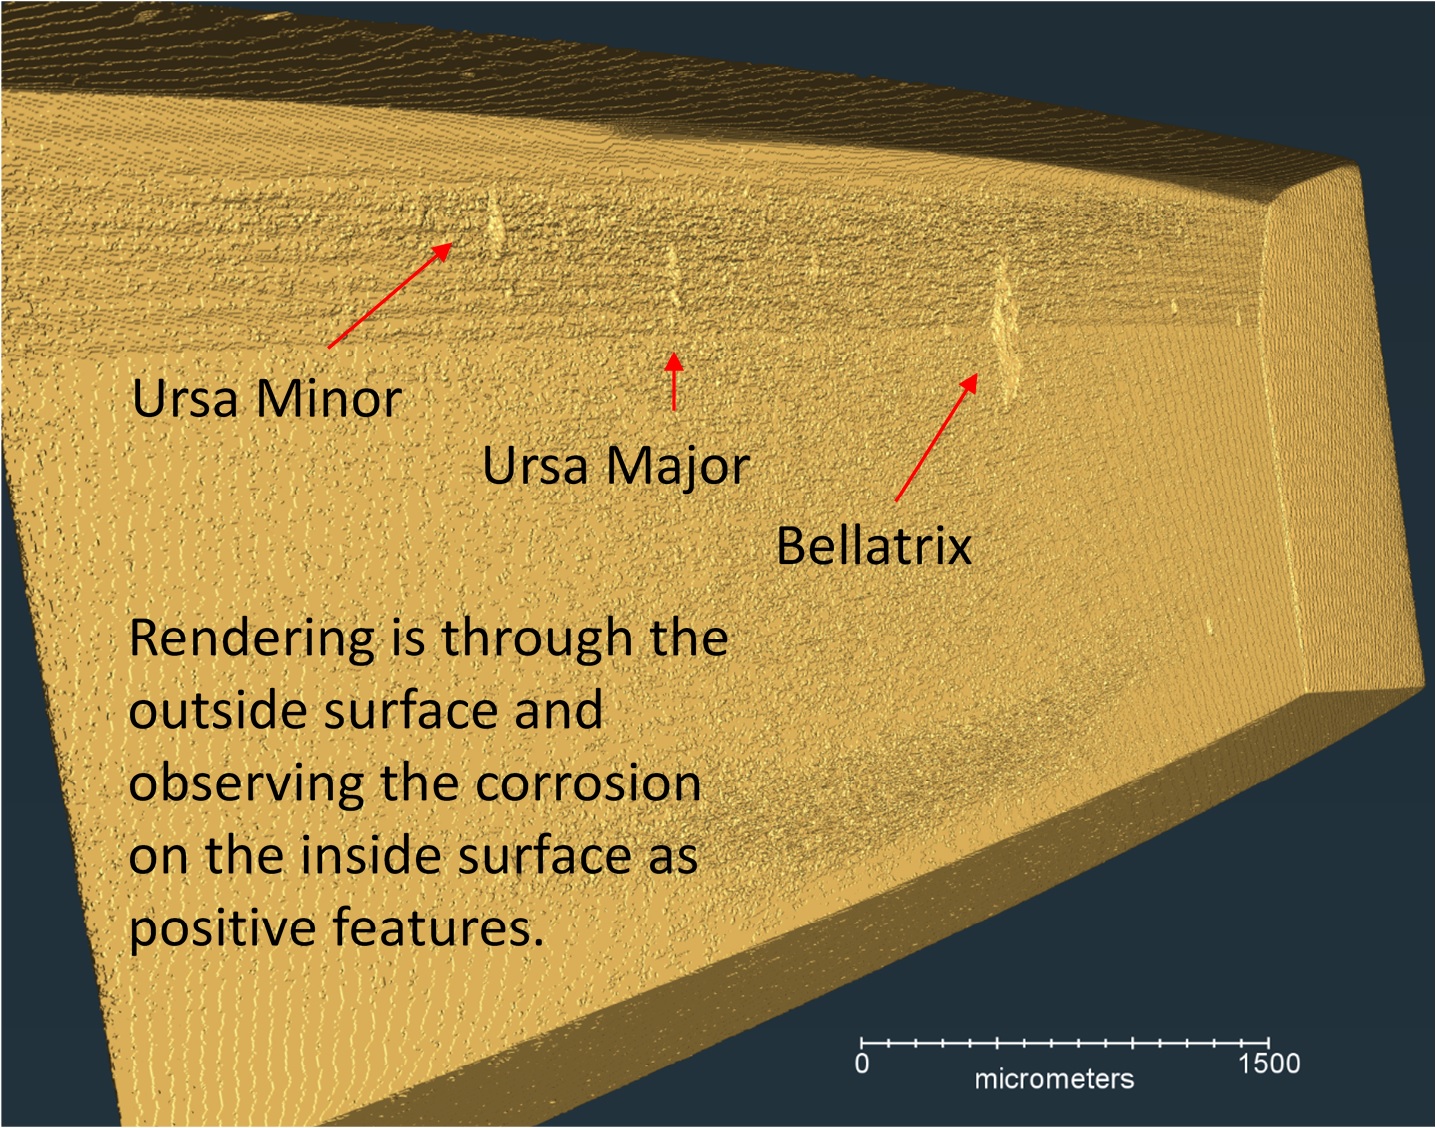 Figure 1. A reconstructed 3D image of three corrosion features along the inside surface of the container near the weld region. This image shows the three major features observed on the surface of one of the samples.